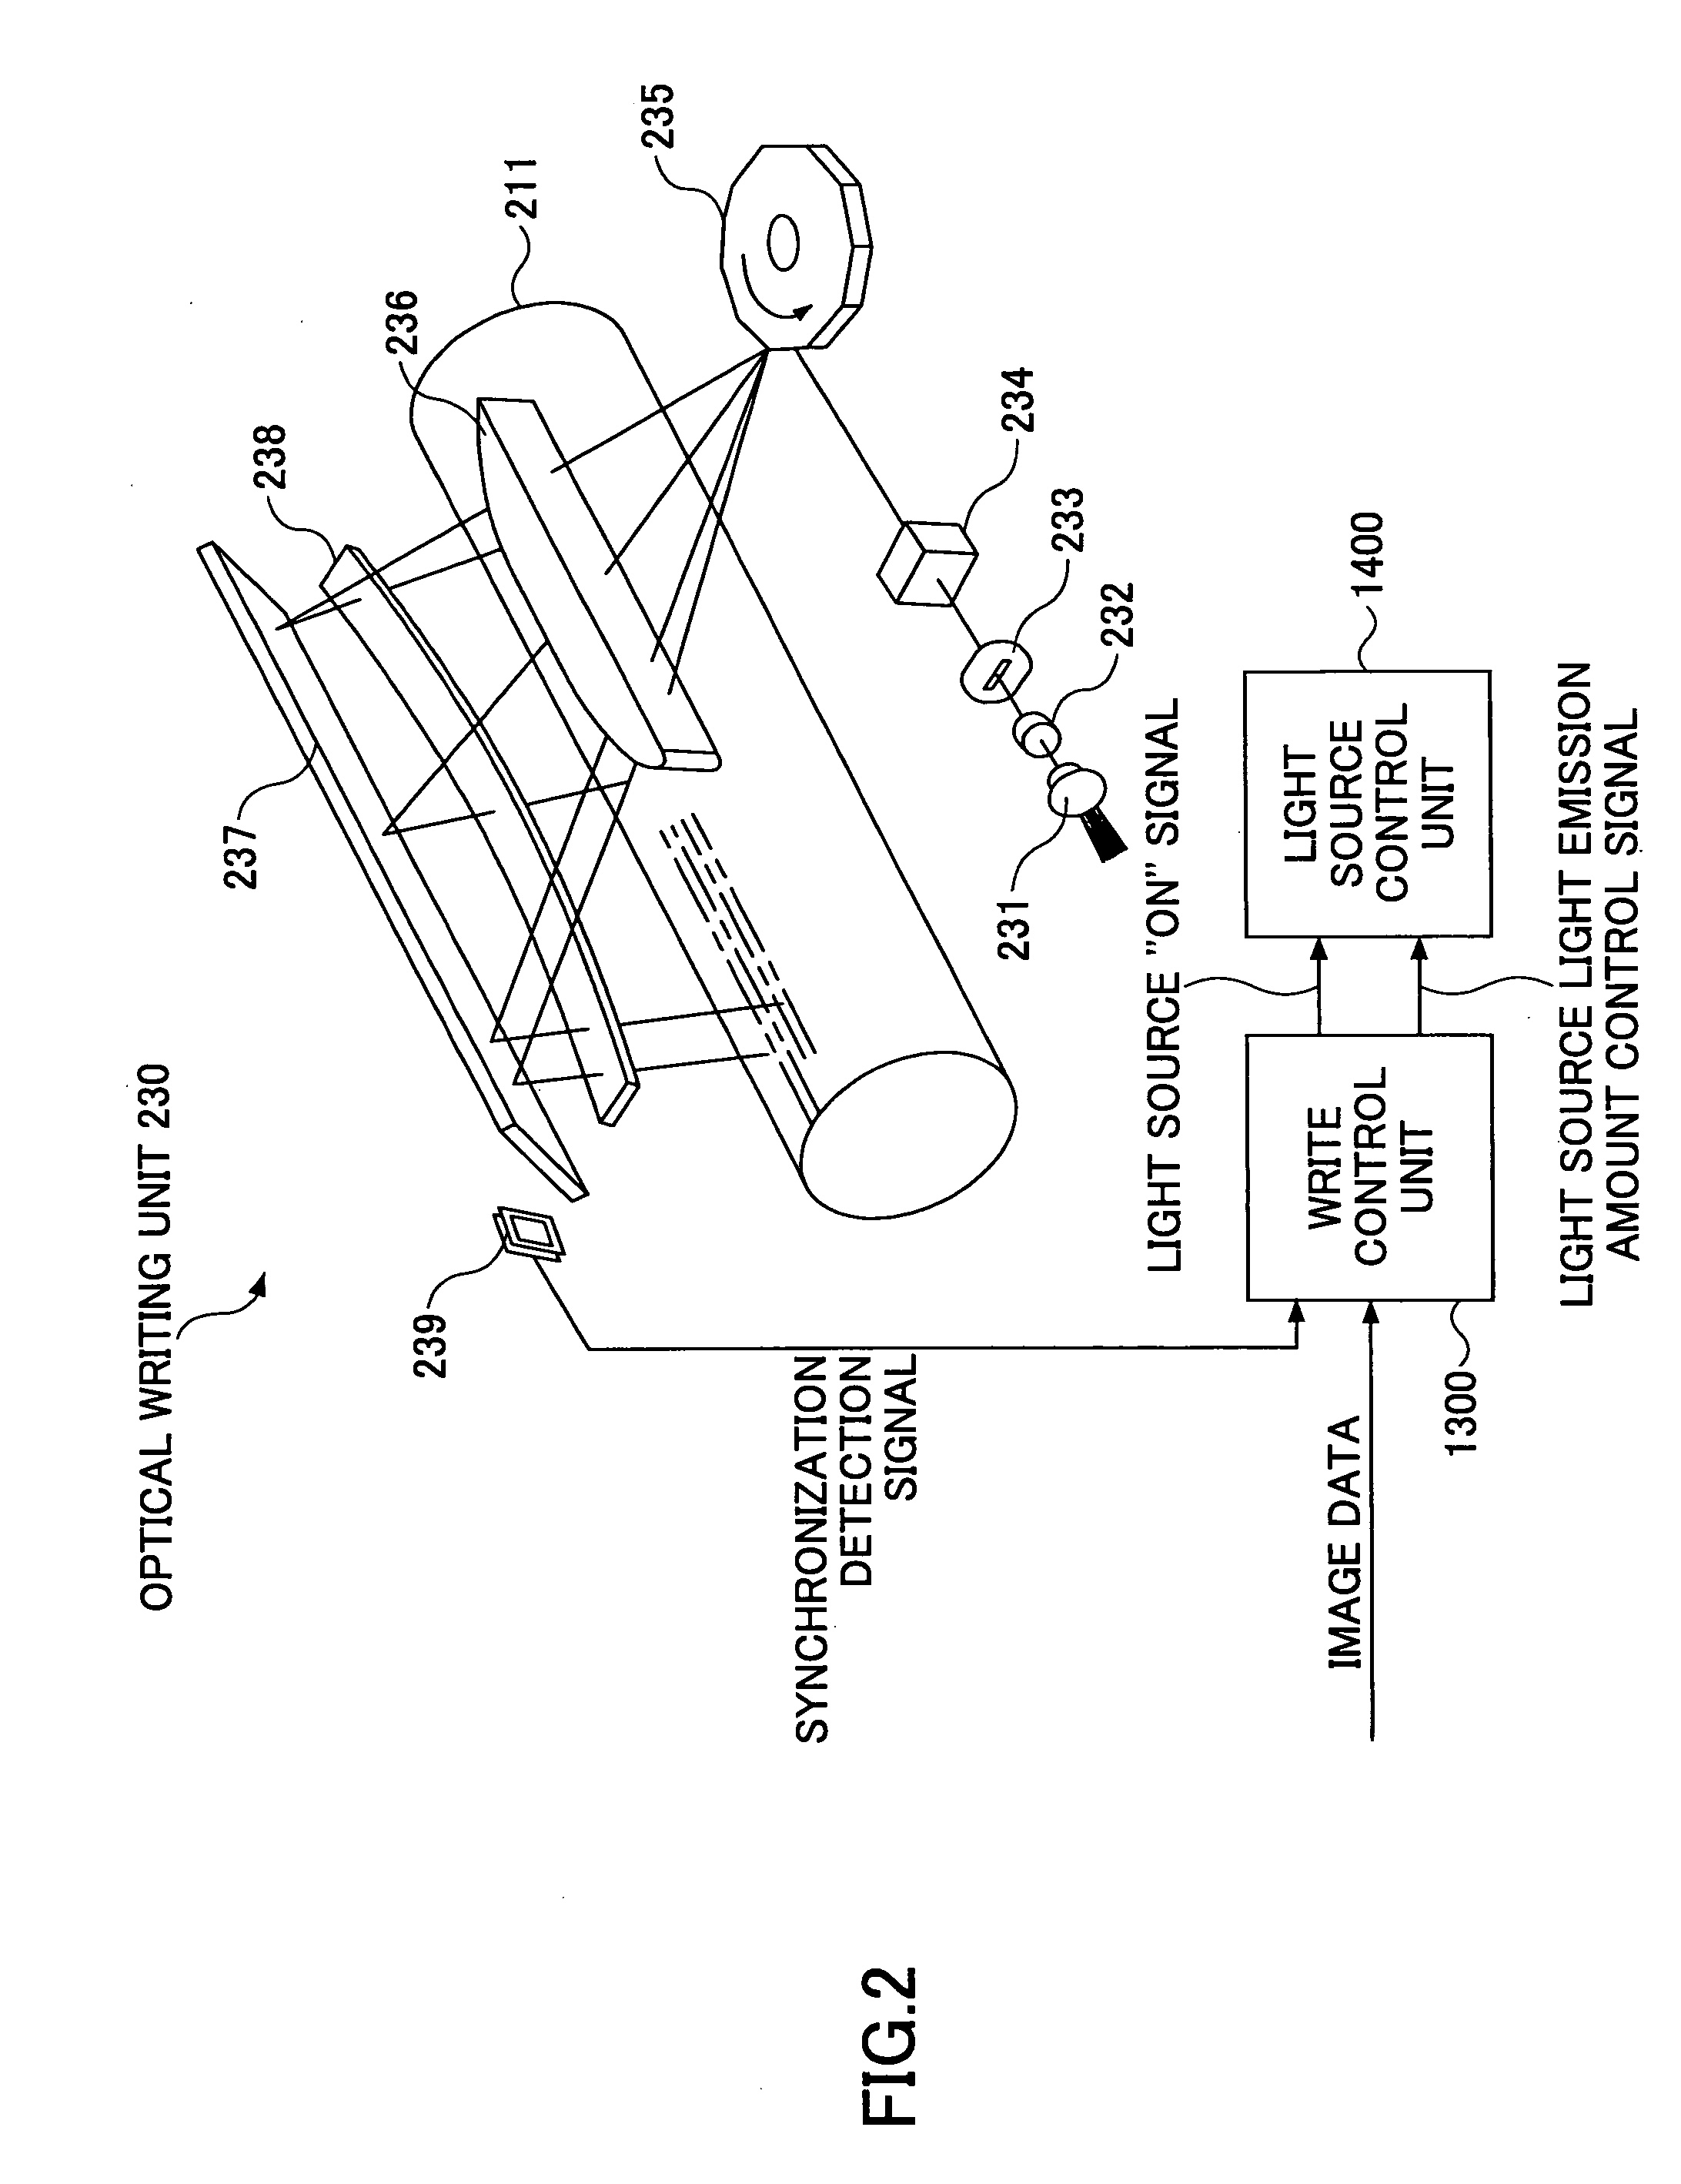 Image forming apparatus, image forming method, and image forming program product